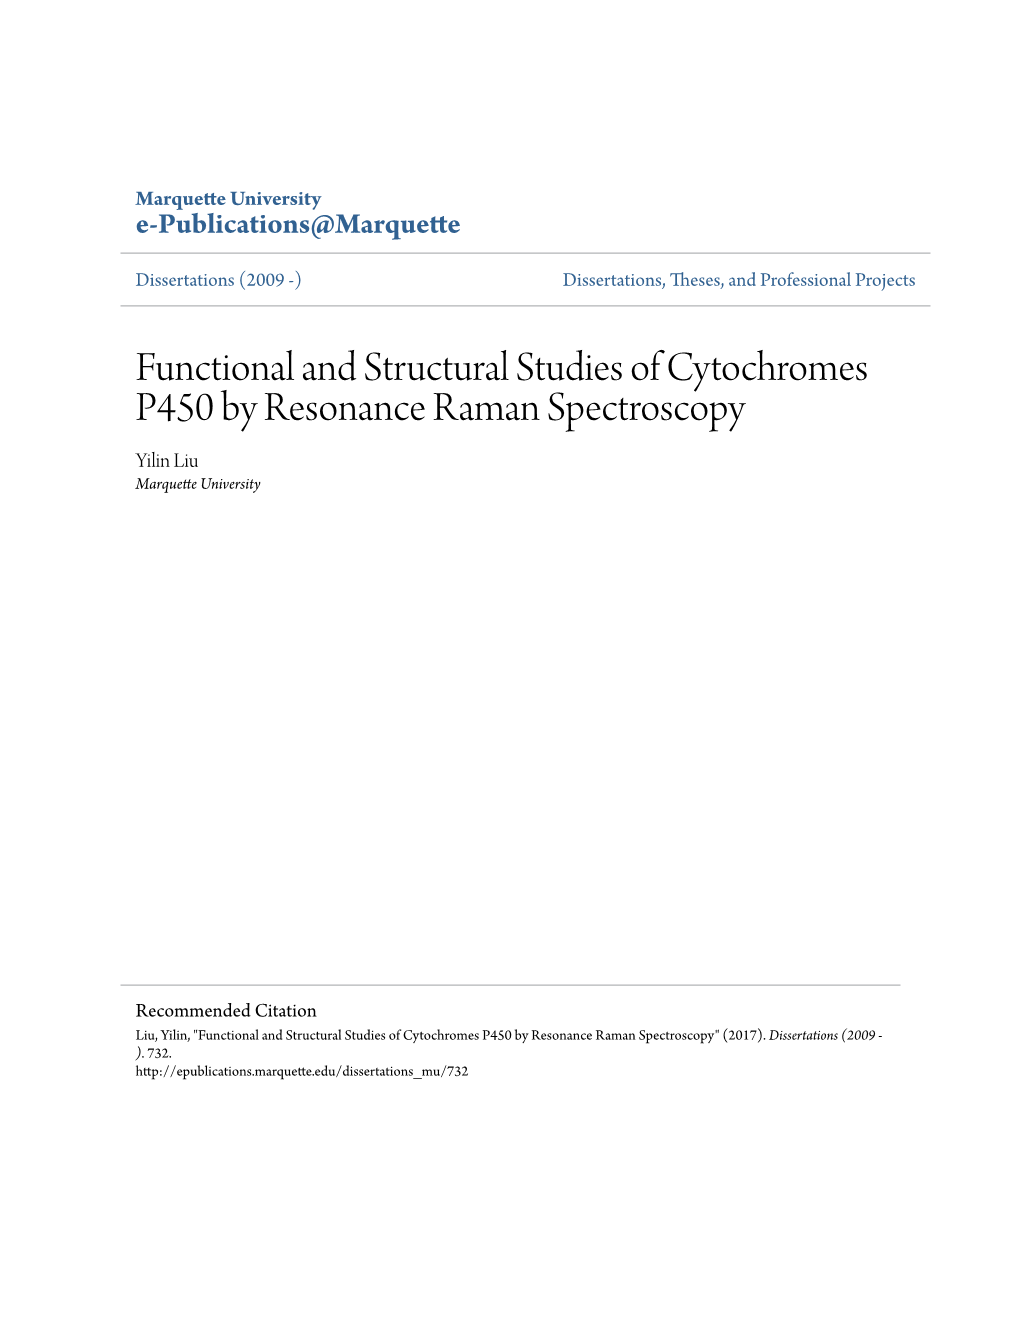 Functional and Structural Studies of Cytochromes P450 by Resonance Raman Spectroscopy Yilin Liu Marquette University